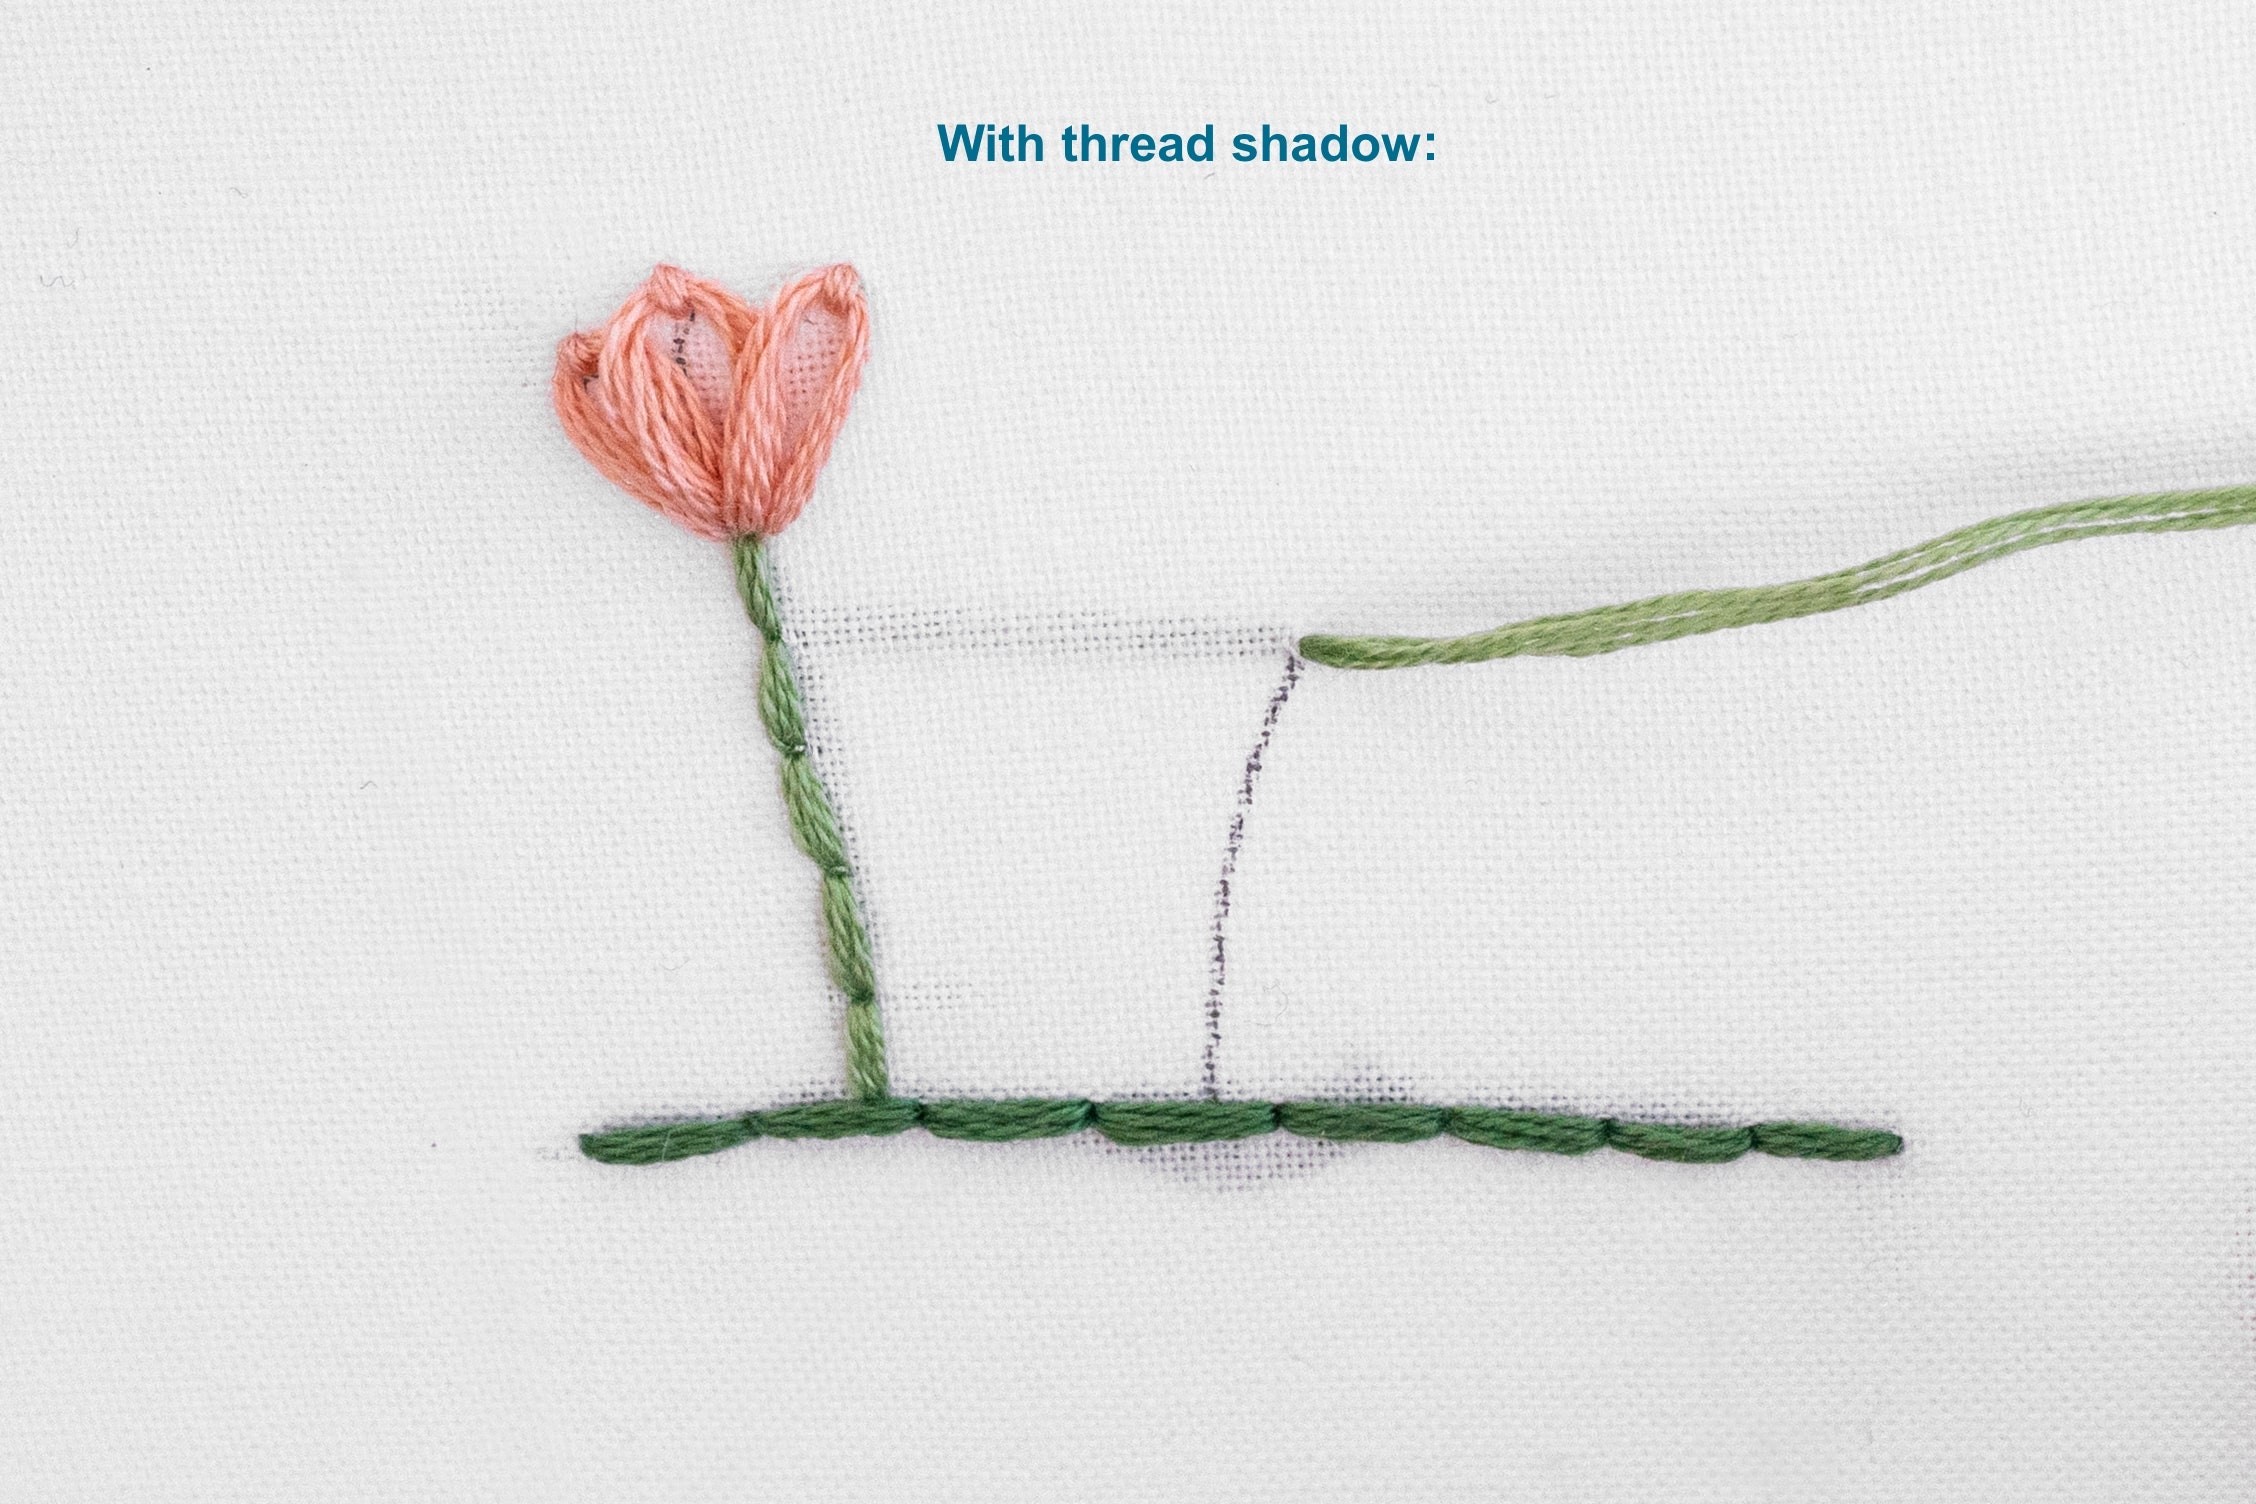 This is an image of an embroidery pattern with a thread shadow.